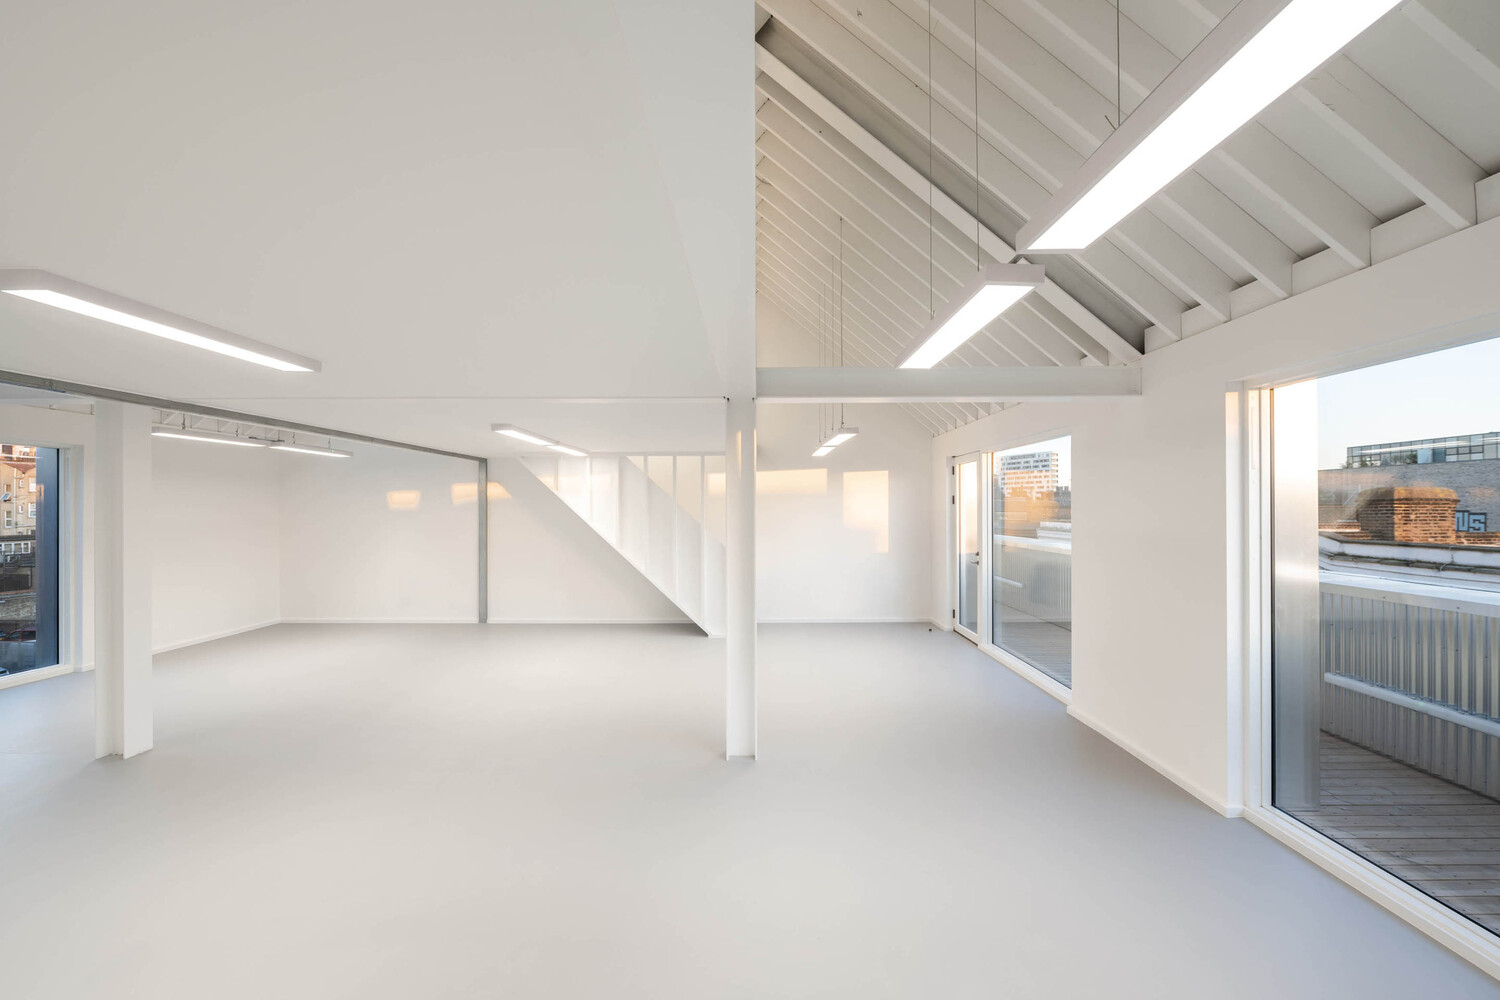 Bradbury Works, Gillett Square, Dalston, refurbished, affordable workspace, flexible spaces, Victorian terrace, collaborative environment, refurbished entrance,polycarbonate facade, reflective, 
